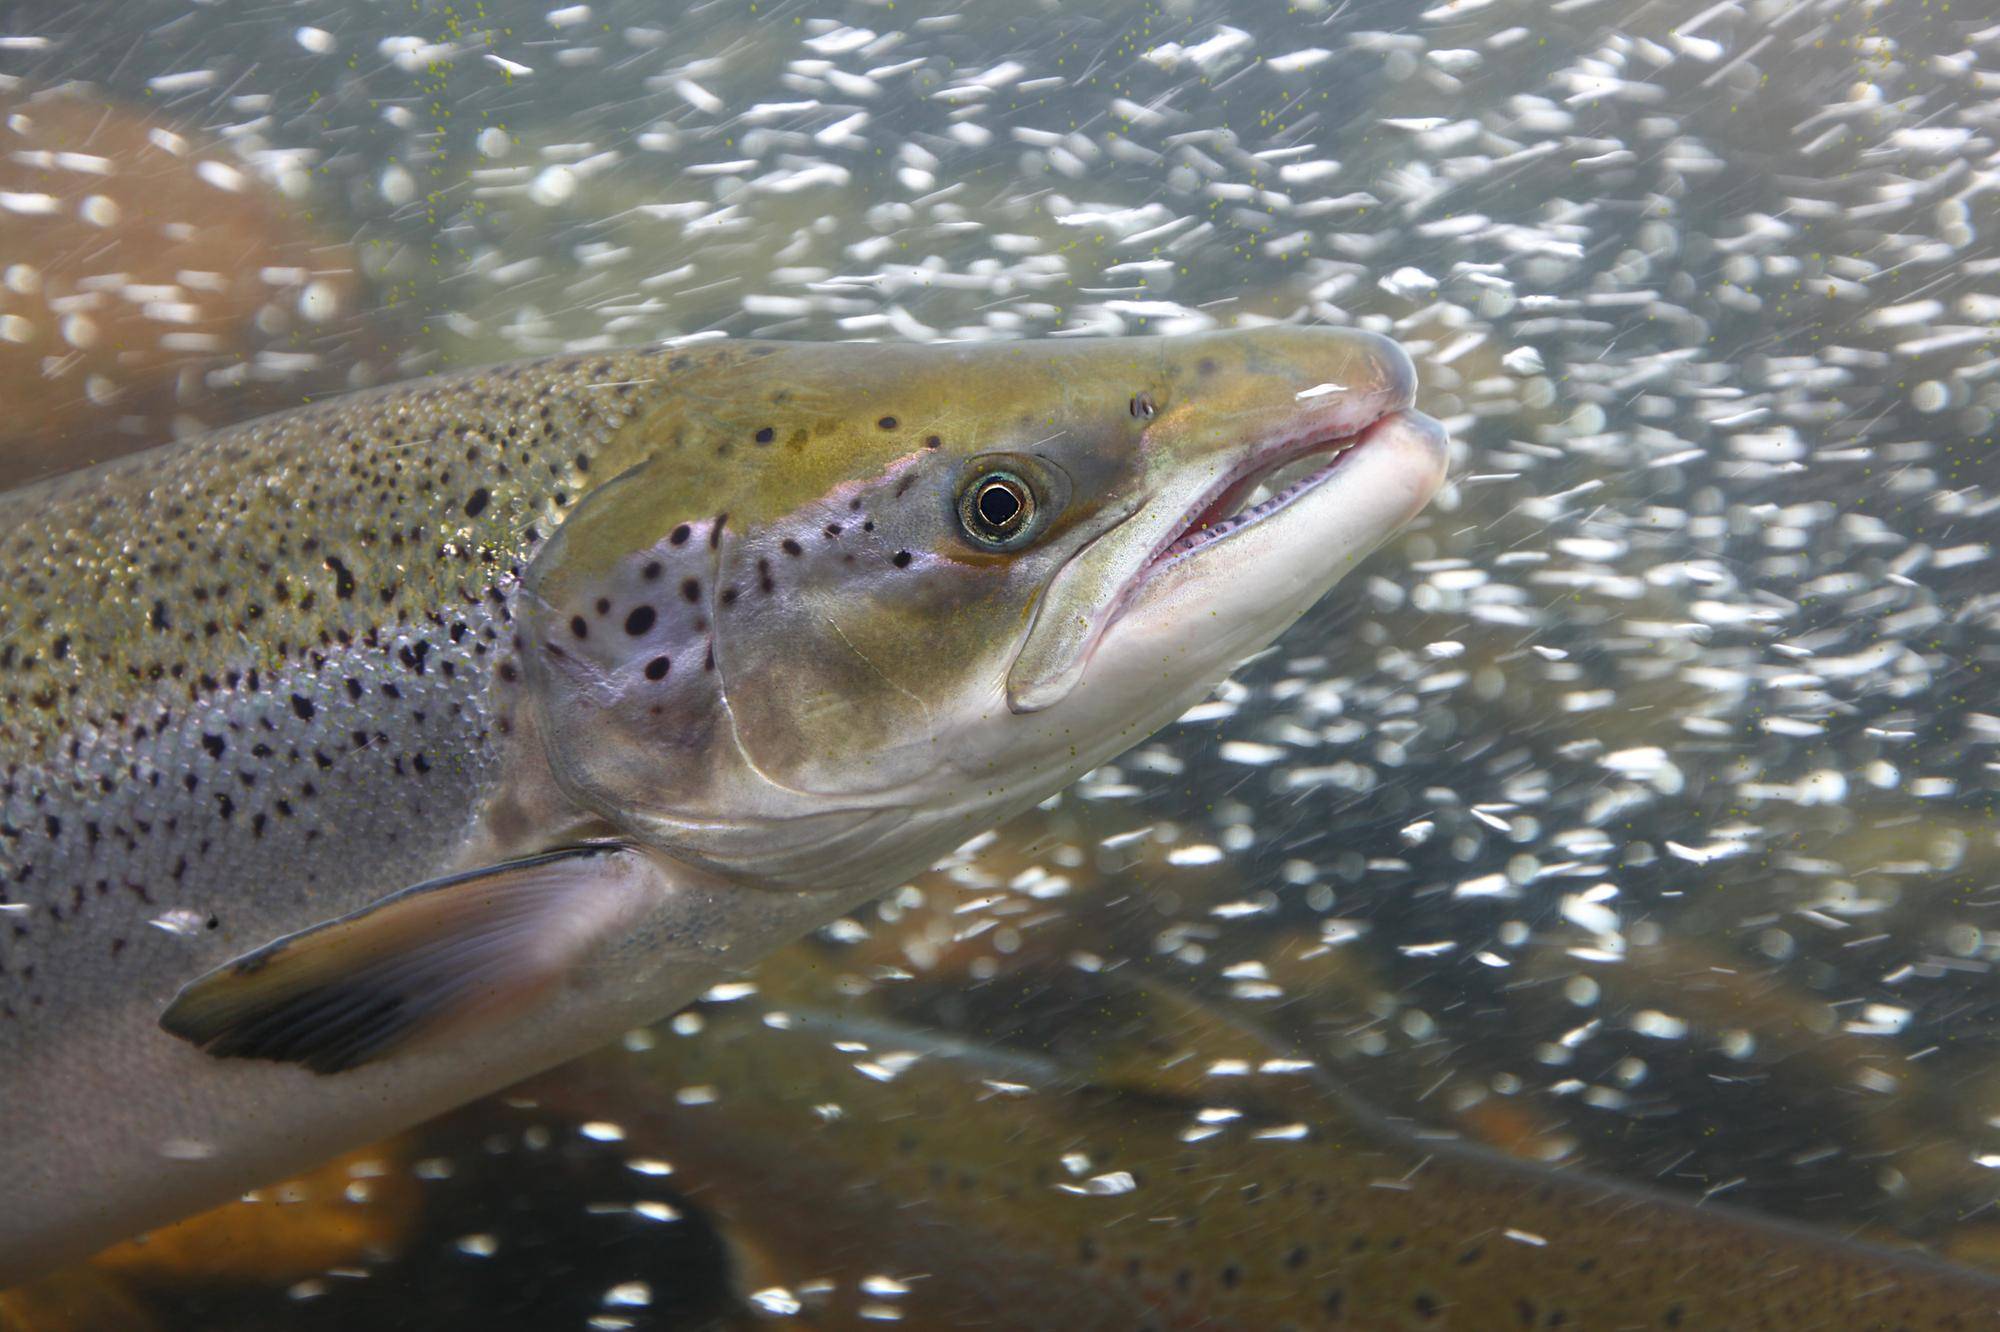 Water extraction licences were suspended to help protect salmon and other wildlife in the River Tweed in 2022 as water levels drop to record lows due to a long spell of very dry weather, linked to climate change.